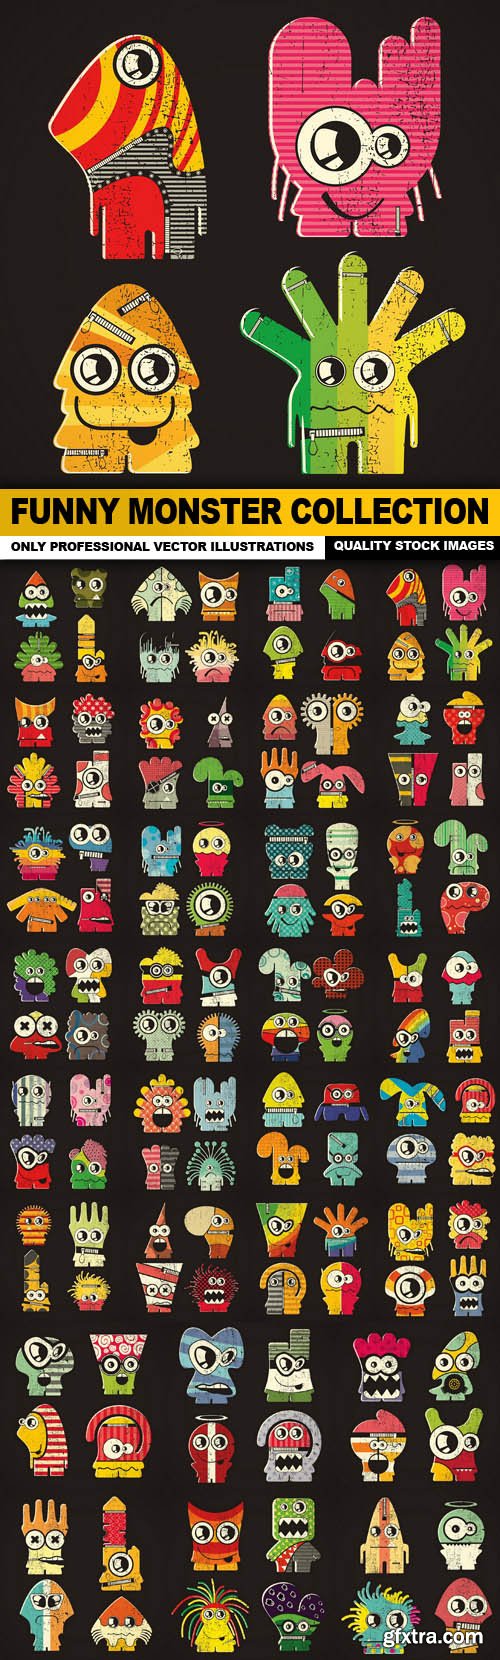 Funny Monster Collection - 30 Vector